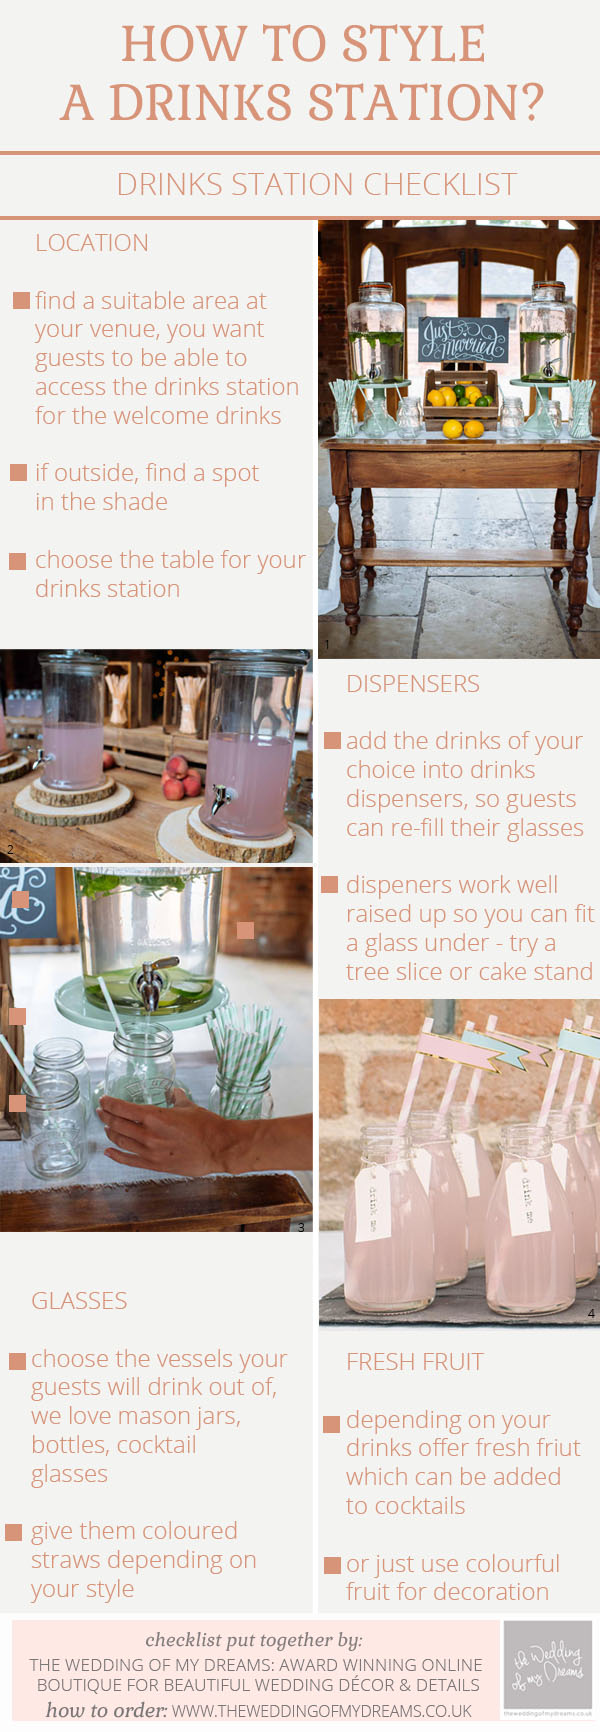 what do I need for a drinks station checklist - how to style a drinks station